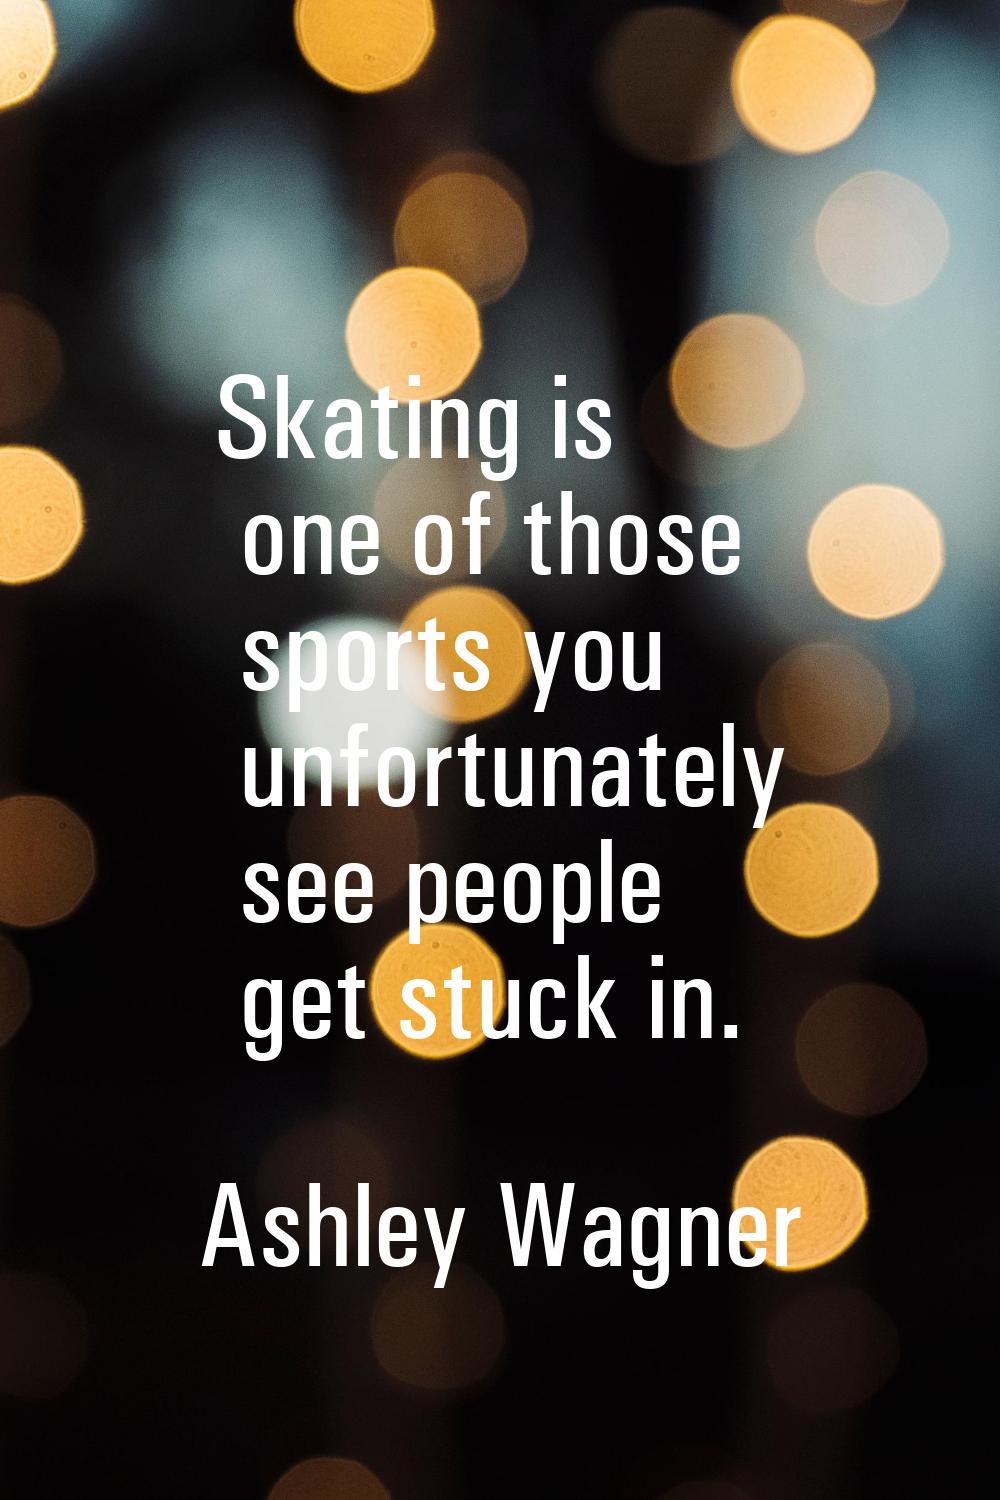 Skating is one of those sports you unfortunately see people get stuck in.